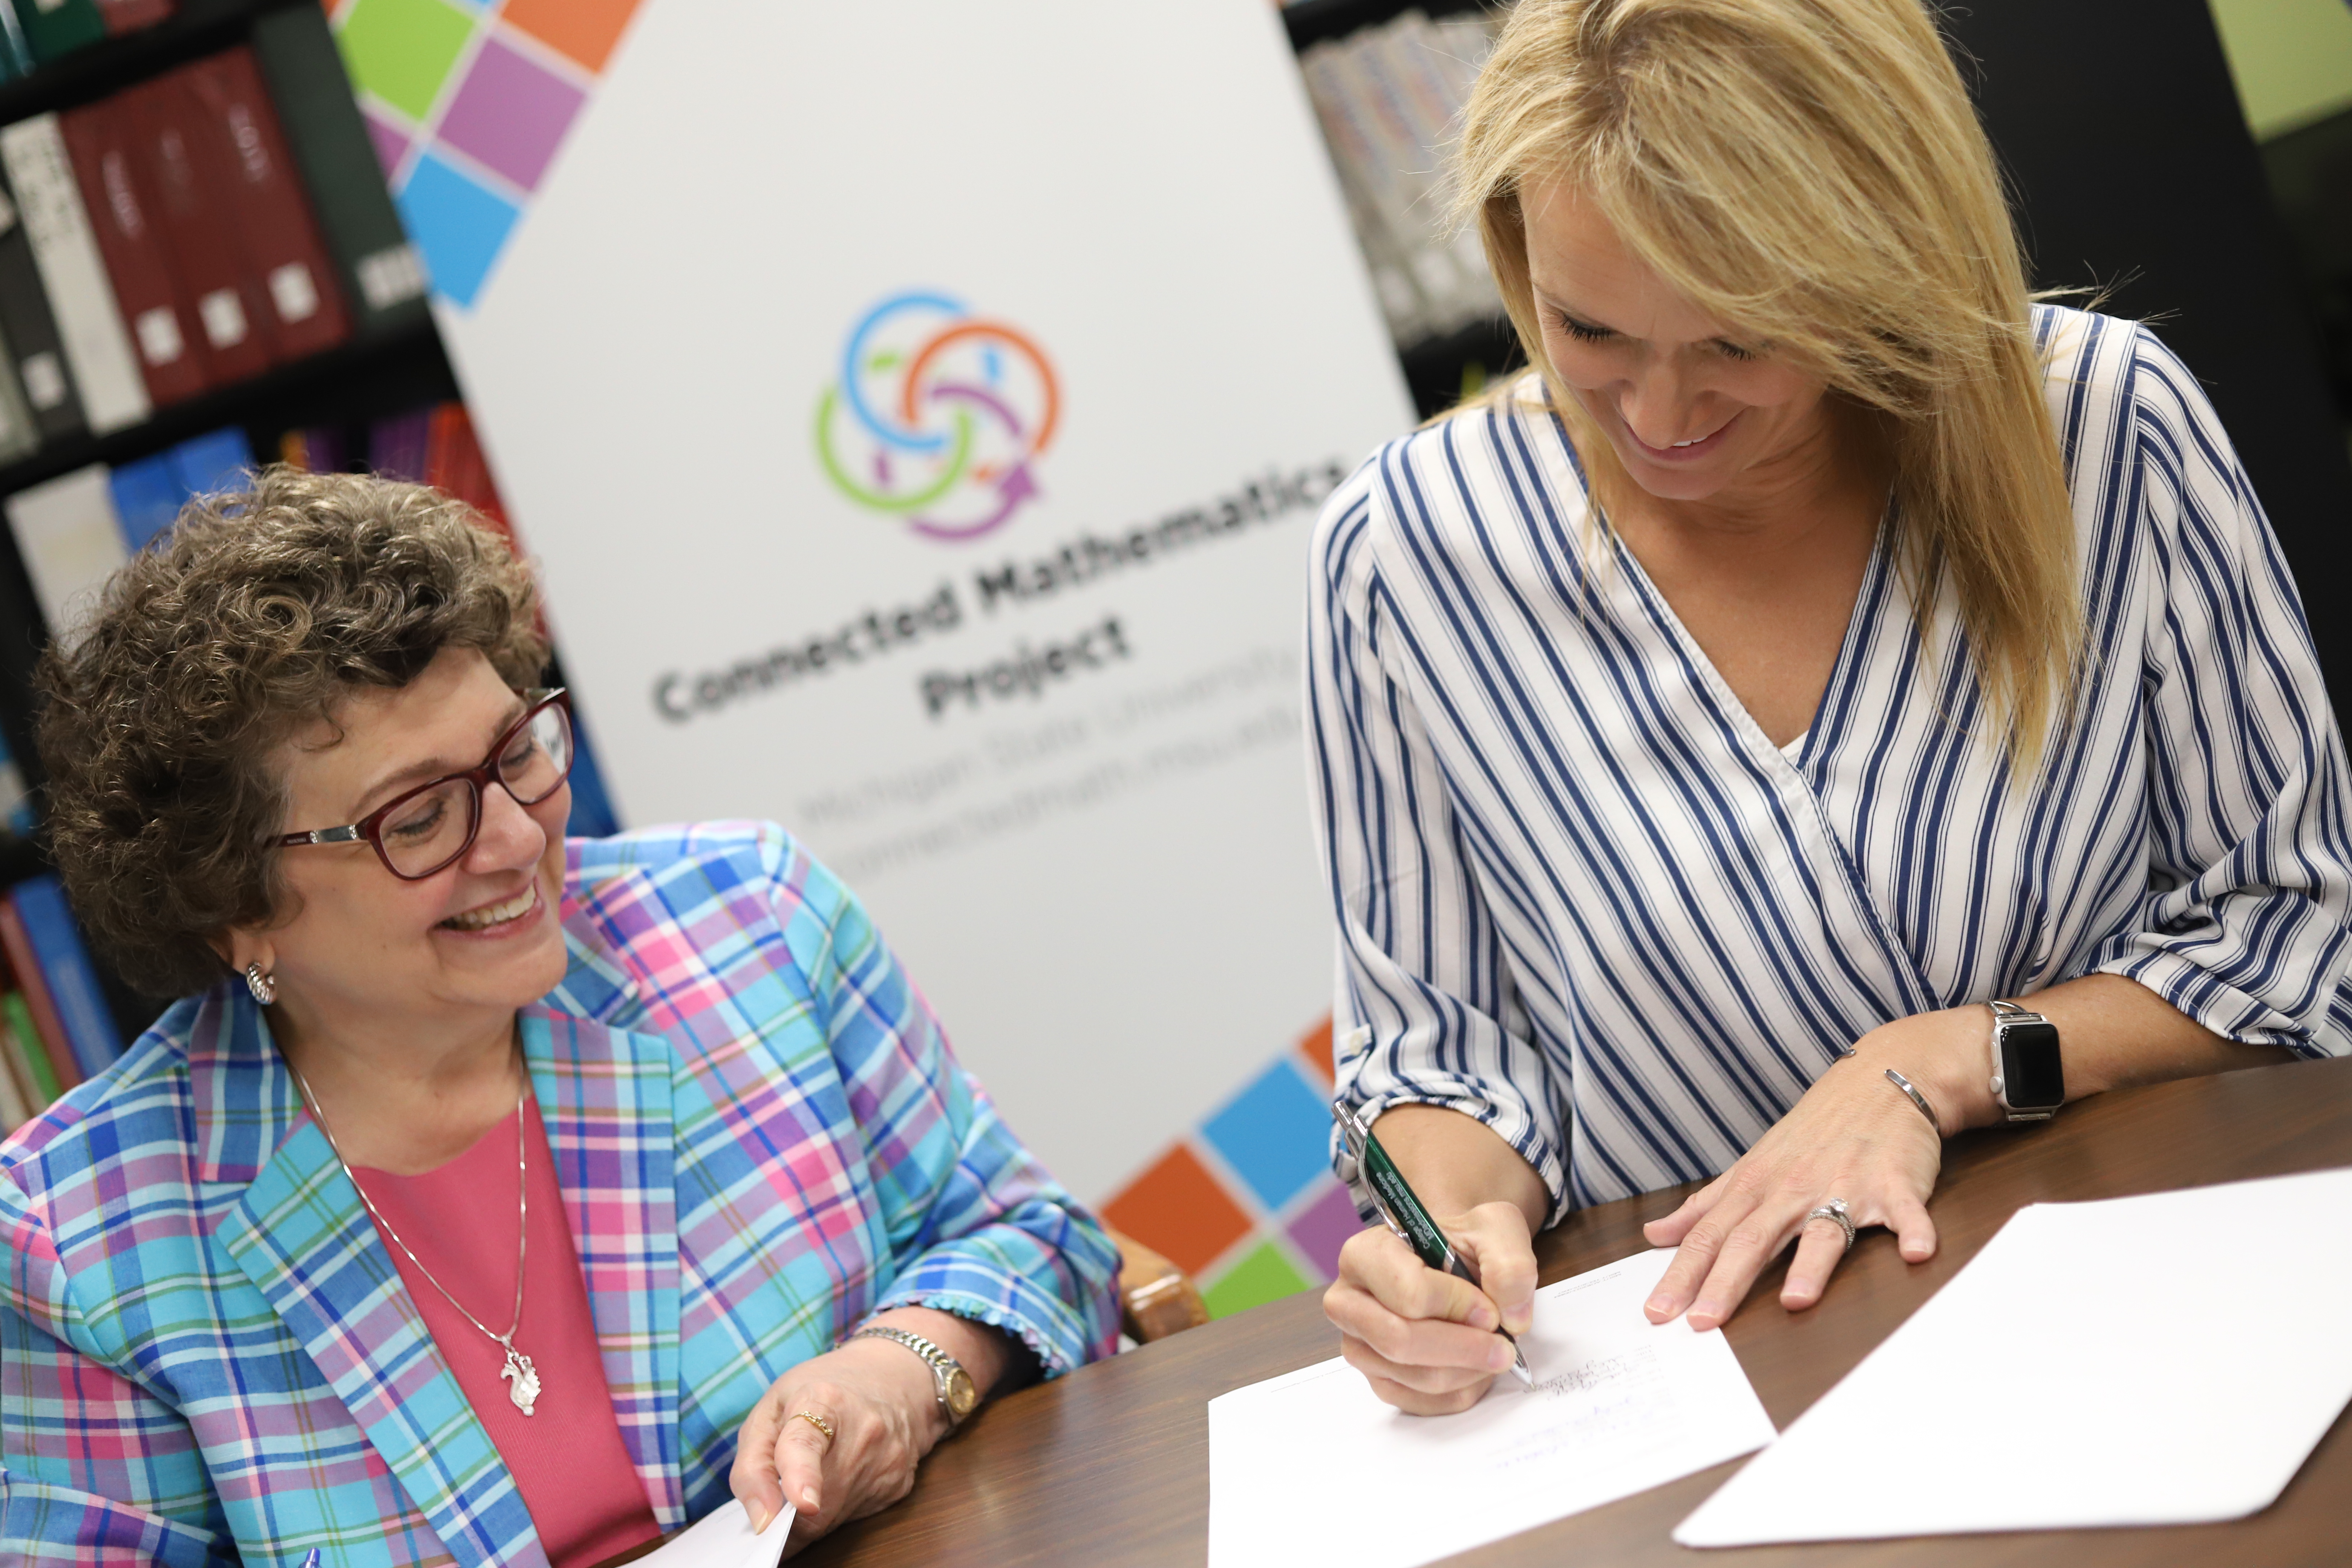 Anne Di Sante (left), Executive Director of MSU Technologies, and Lisa Kelp (right), VP of Learning and Development at Lab-Aids sign the partnership agreement for Lab-Aids to publish the next edition from Connected Mathematics Project at Michigan State University.